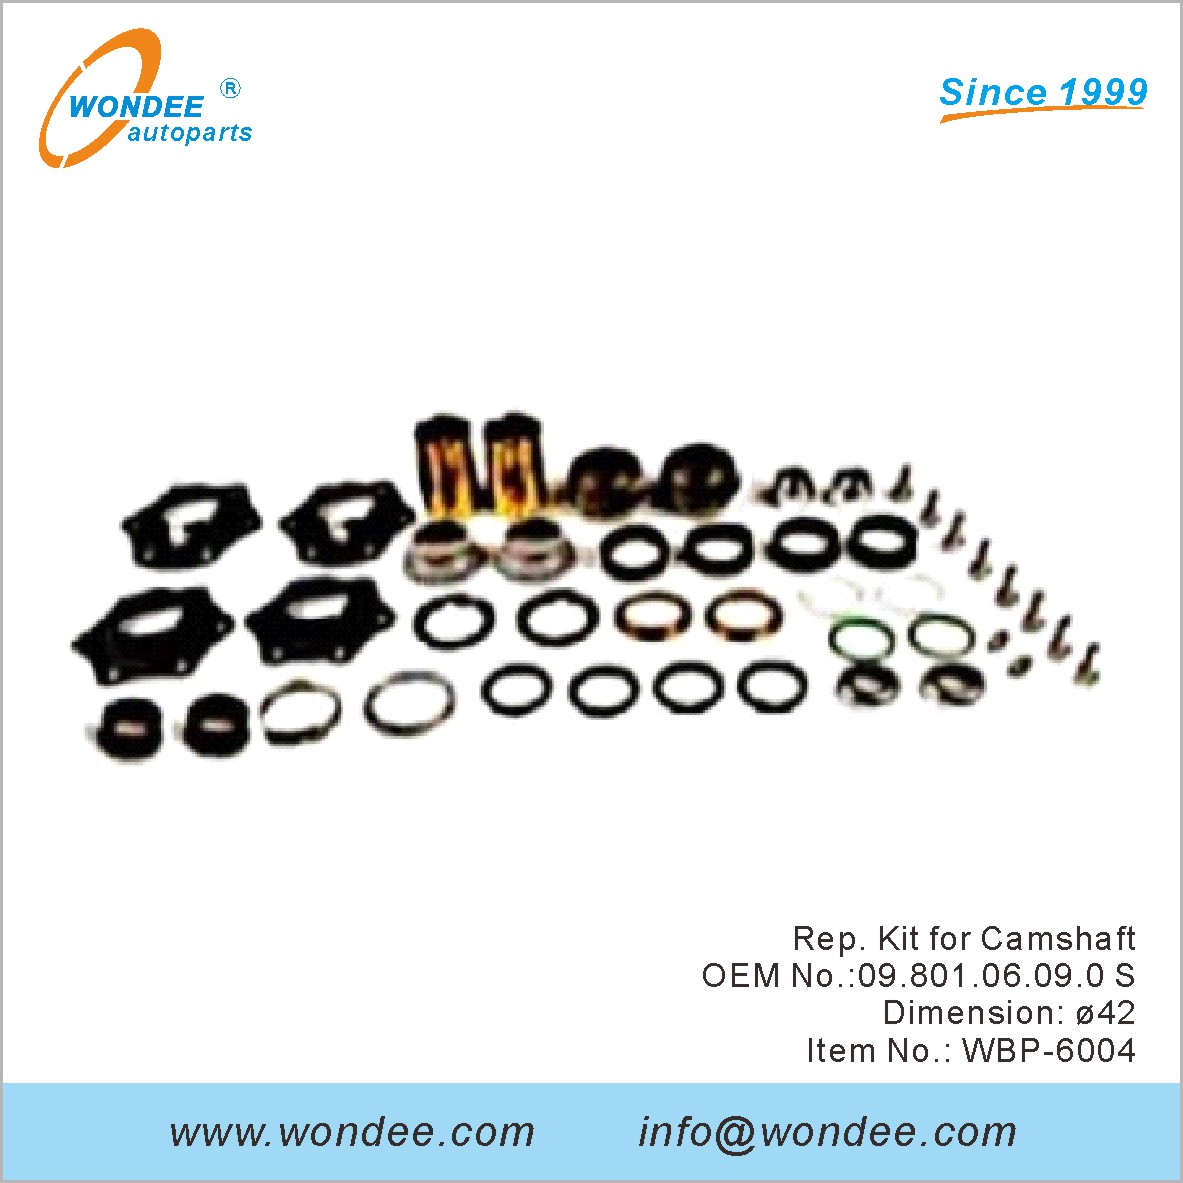 Rep Kit for Camshaft OEM 0980106090 S for BPW from WONDEE